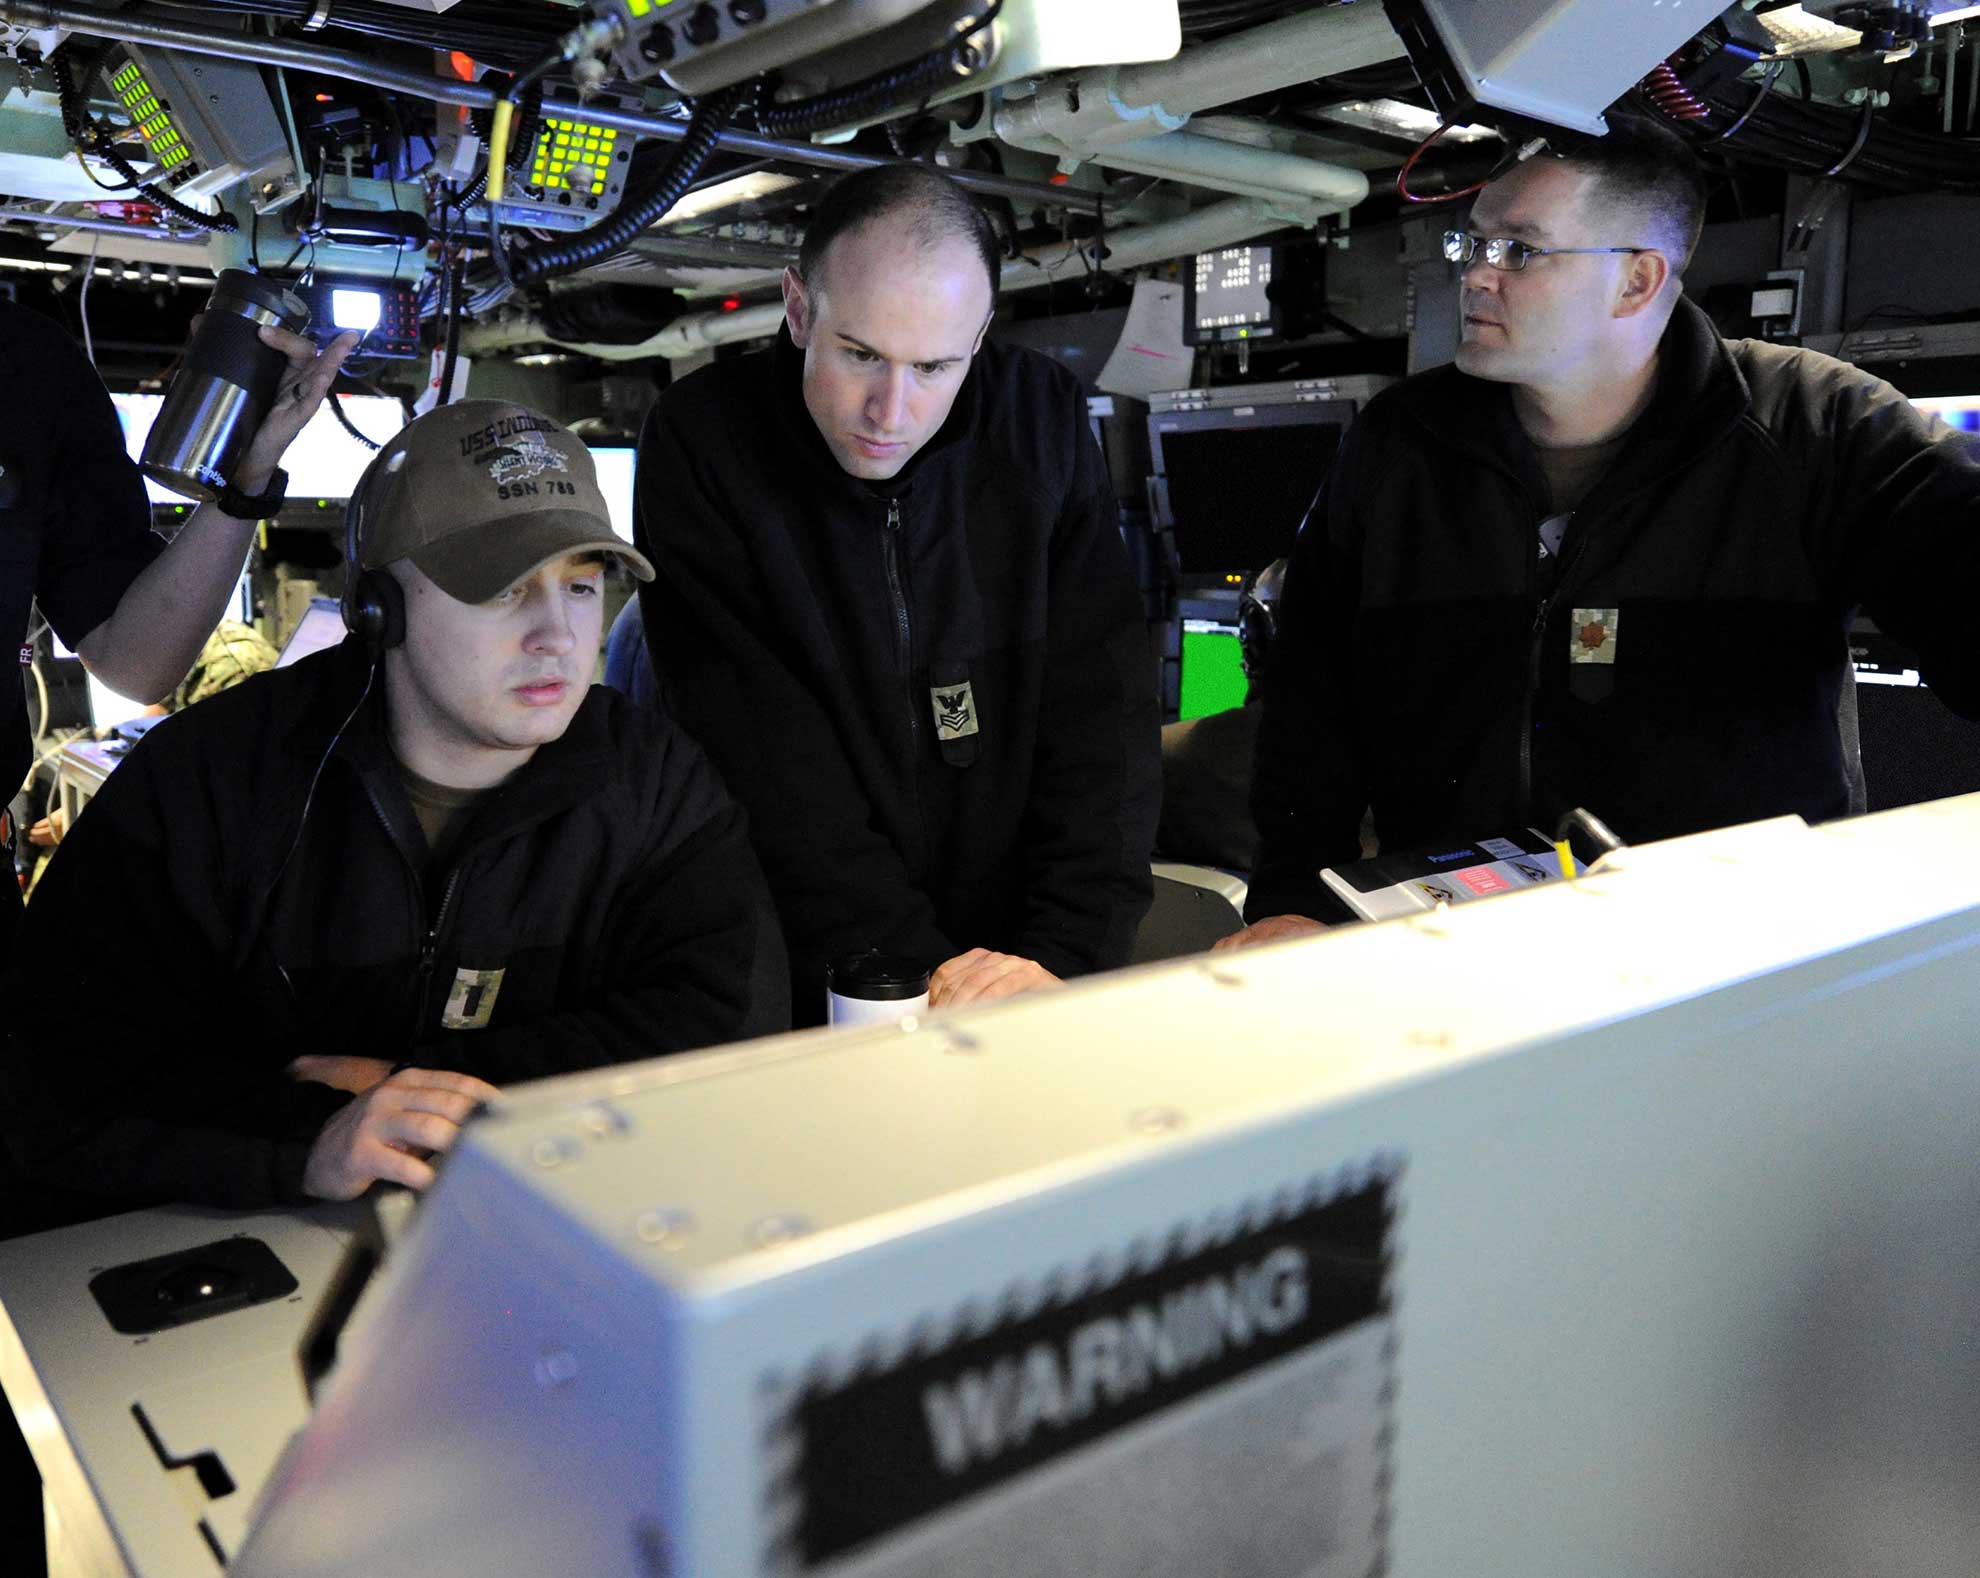 Atlantic Ocean (June 24, 2018) Sailors assigned to the Virginia-class fast attack submarine Pre-Commissioning Unit (PCU) Indiana (SSN 789) stand watch in the control room while underway. Indiana is the 16th Virginia-class fast attack submarine and is scheduled to be commissioned Sept. 29, 2018 -- U.S. Navy photo by Chief MCS Darryl Wood. -